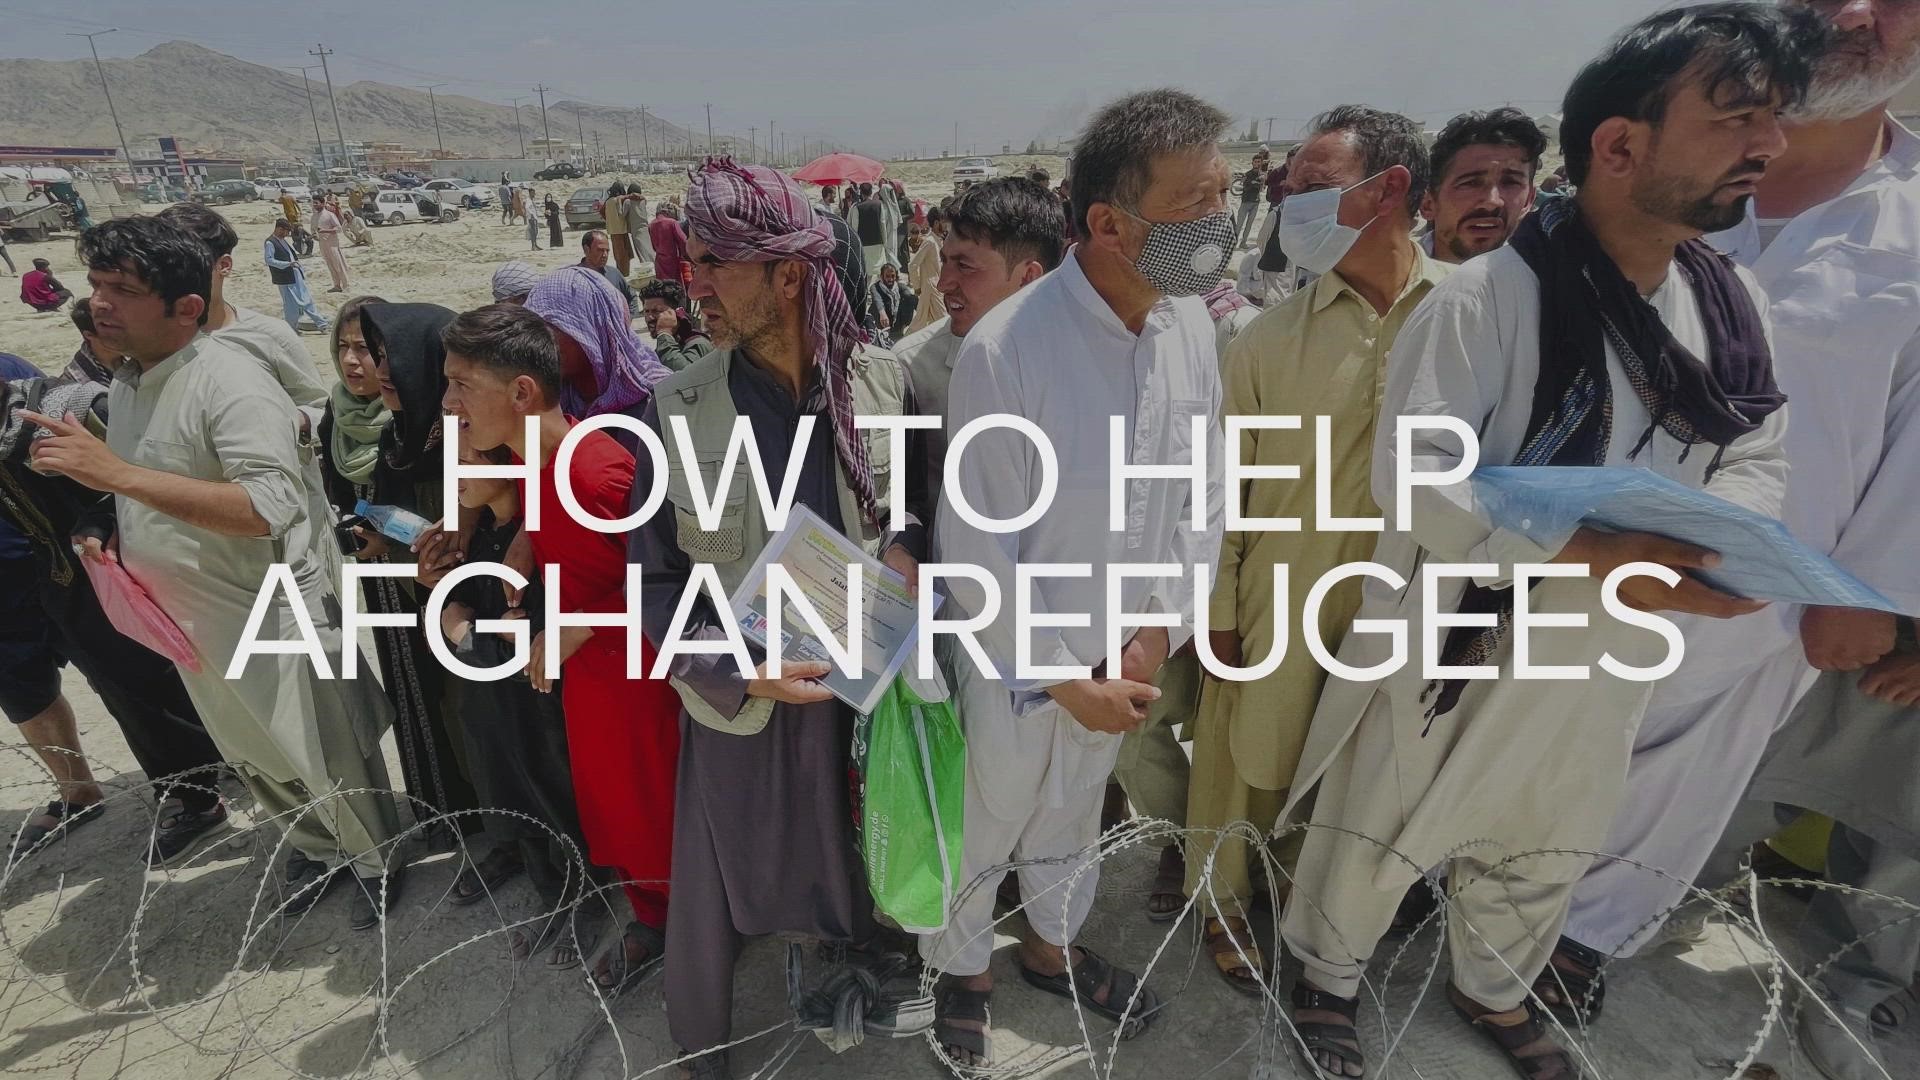 Here's how you can help people fleeing violence in Afghanistan.